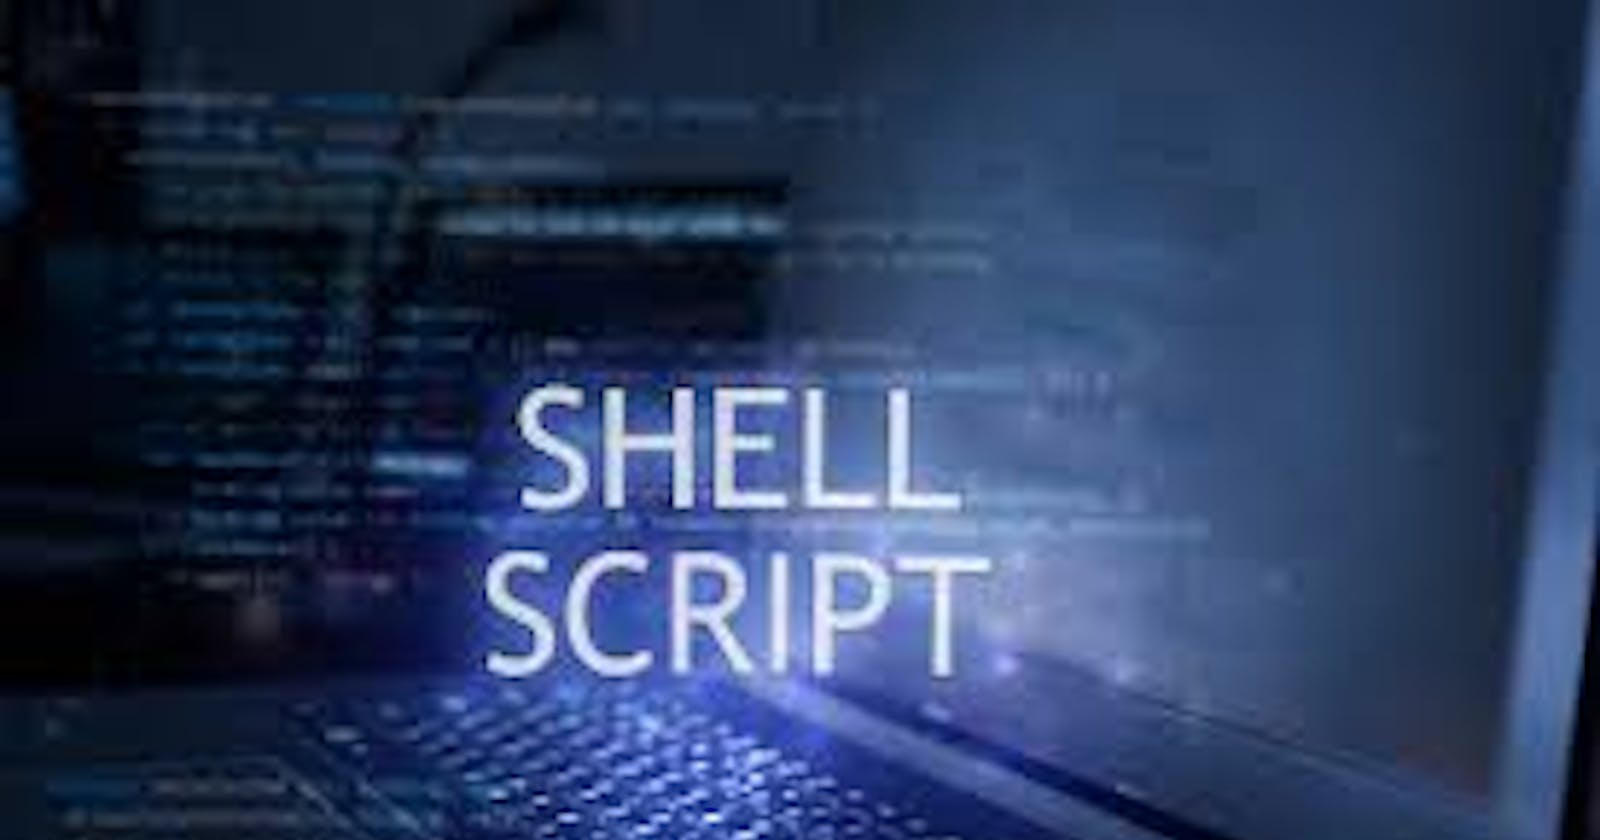 Day 5: Advanced Linux Shell Scripting with User Management